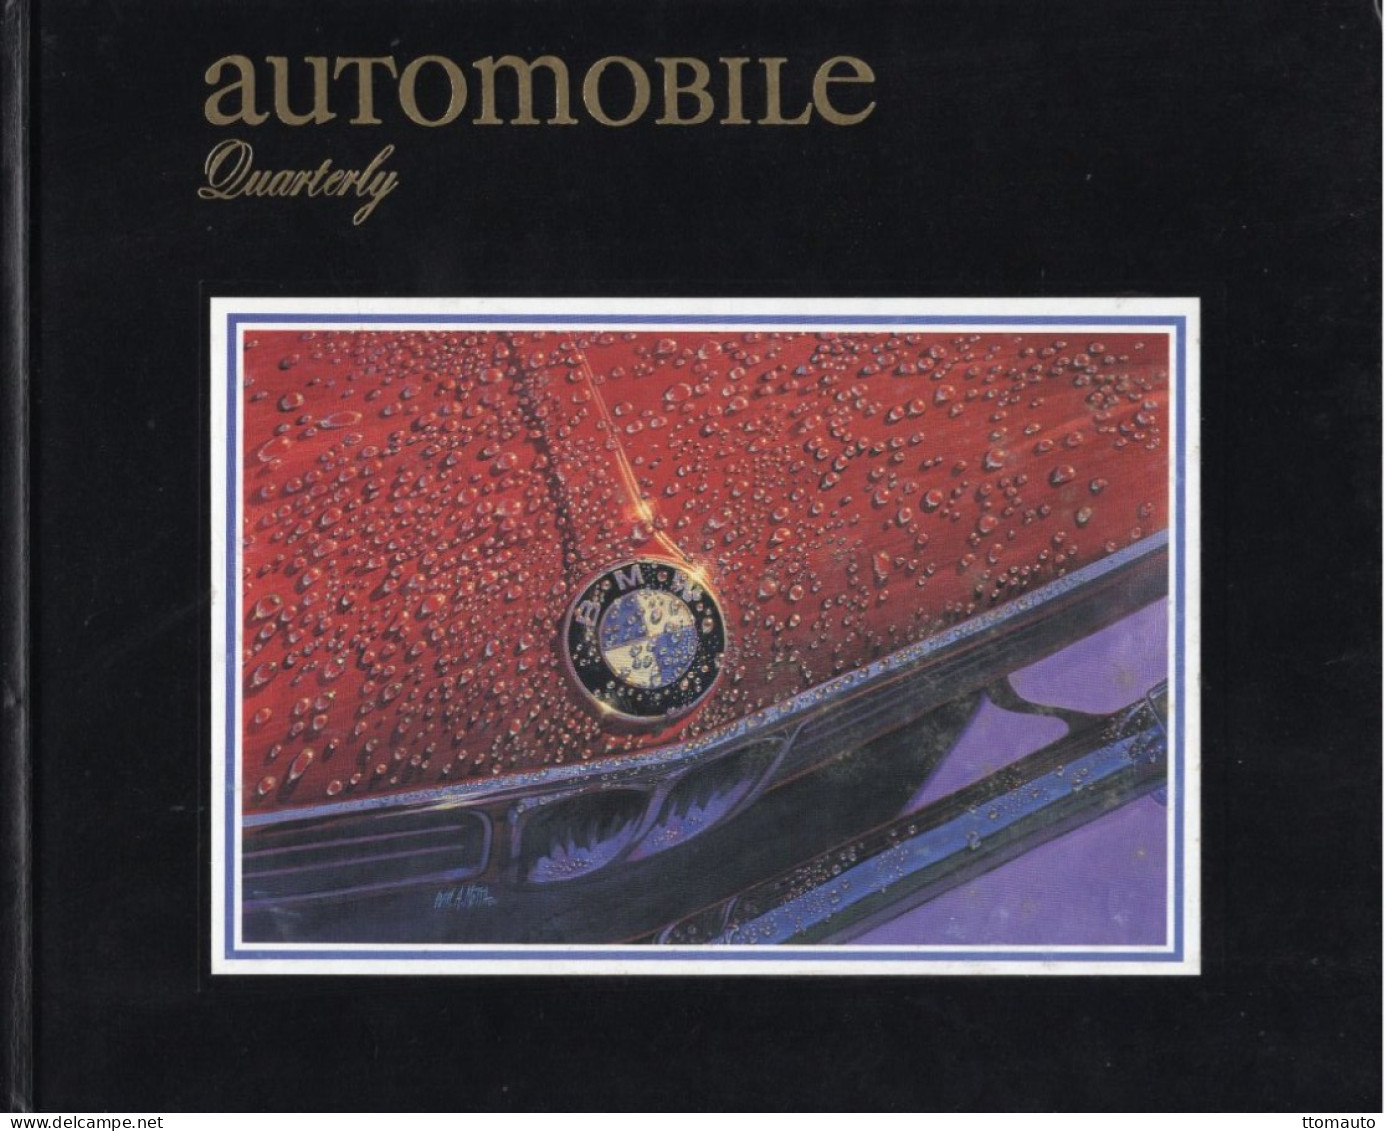 Automobile Quarterly Volume 36 Number 4 (July 1997) - History Of BMW - FREE SHIPPING TO EUROPE & US - Transportation